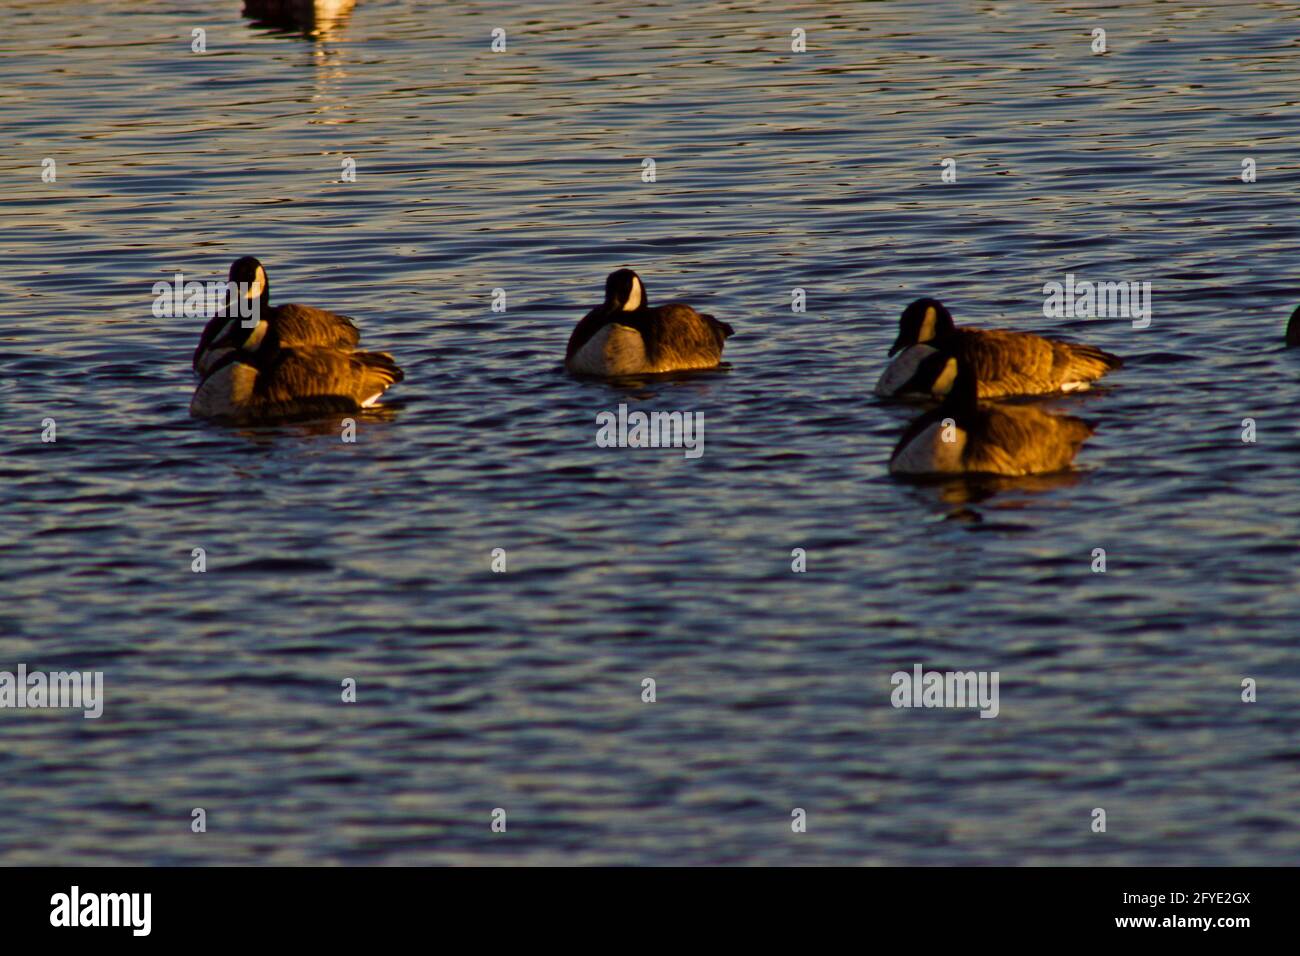 Canada geese resting on South East City Park Public Fishing Lake, Canyon, Texas. Stock Photo